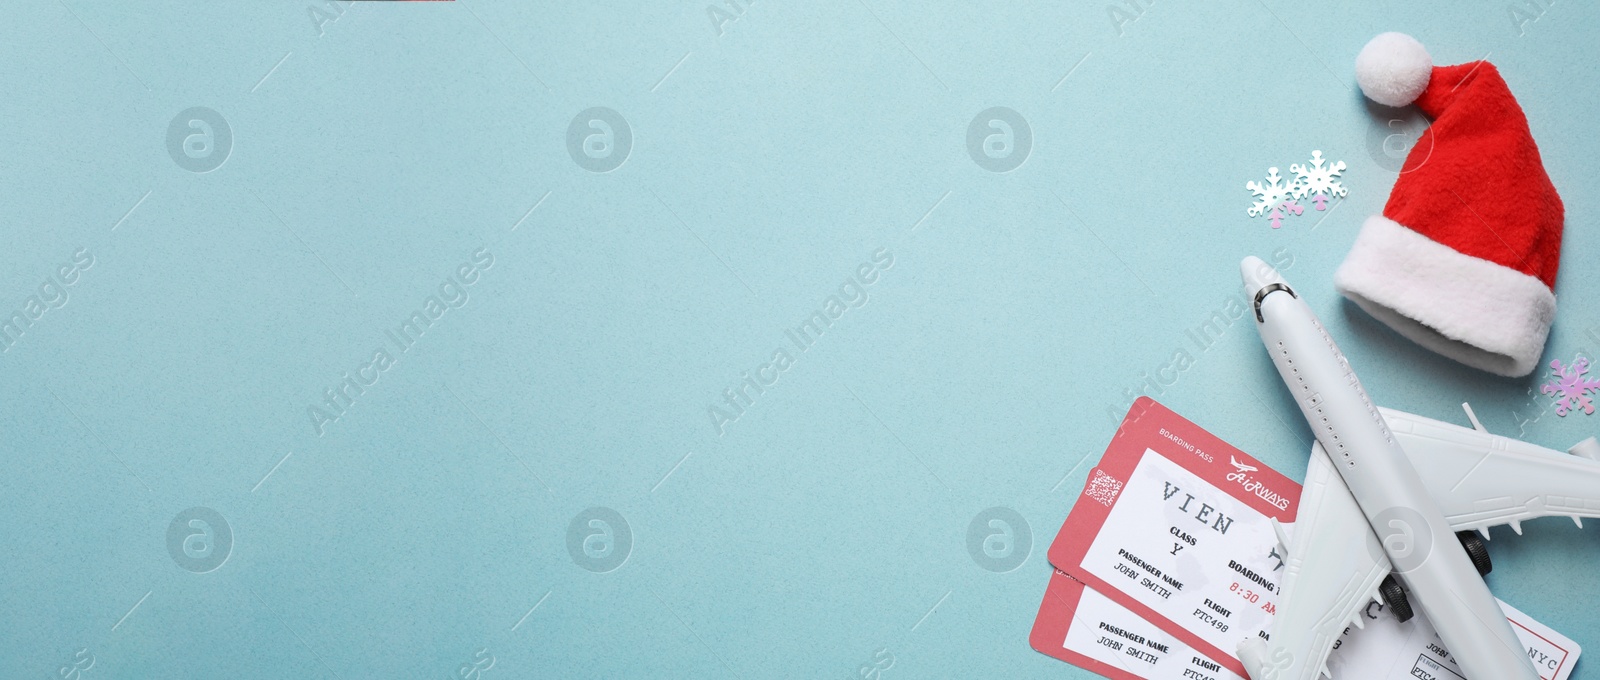 Image of Santa hat, toy airplane and airline tickets on light blue background, space for text. Christmas vacation